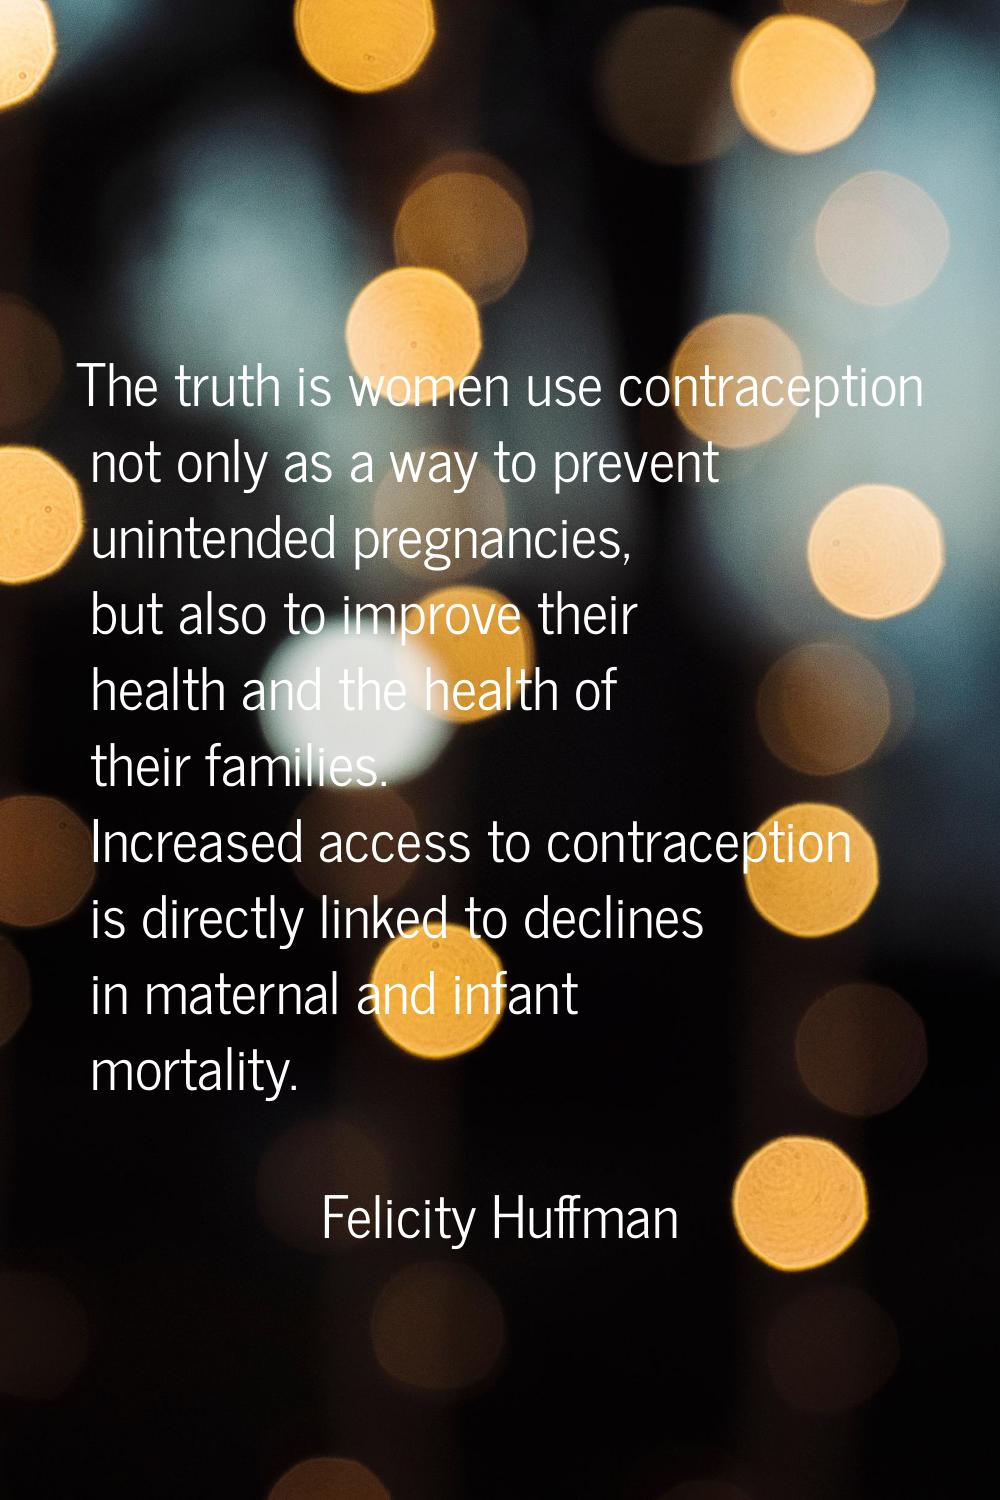 The truth is women use contraception not only as a way to prevent unintended pregnancies, but also 